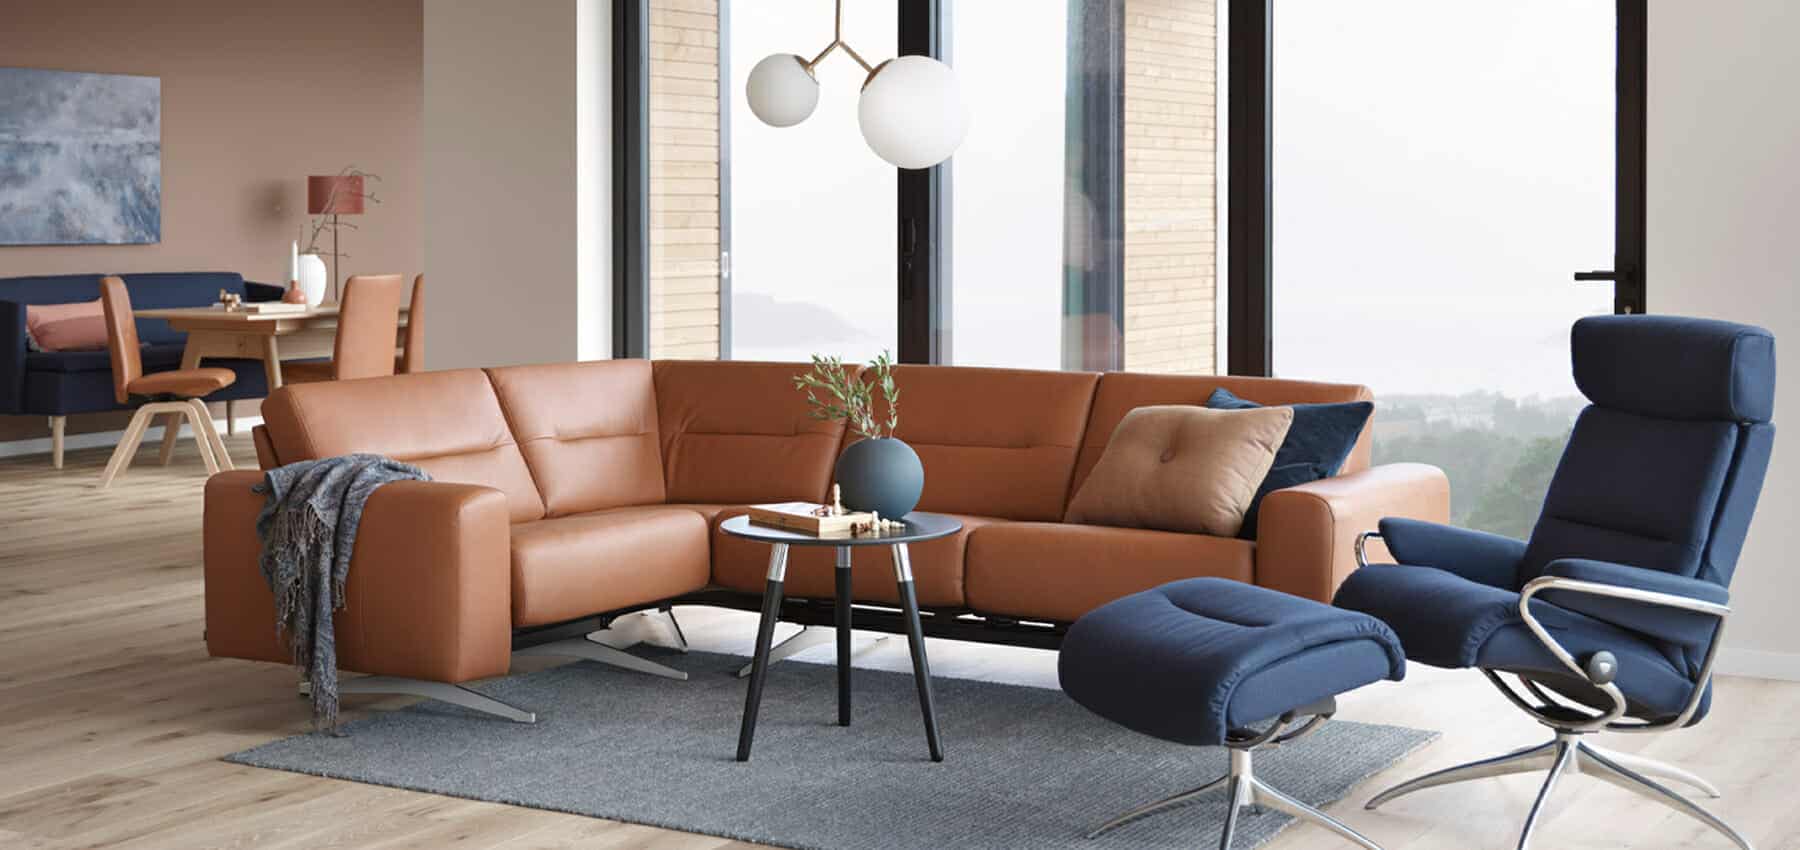 How to choose the right leather sofa for your modern home in Utah - Modern leather furniture in contemporary style living room